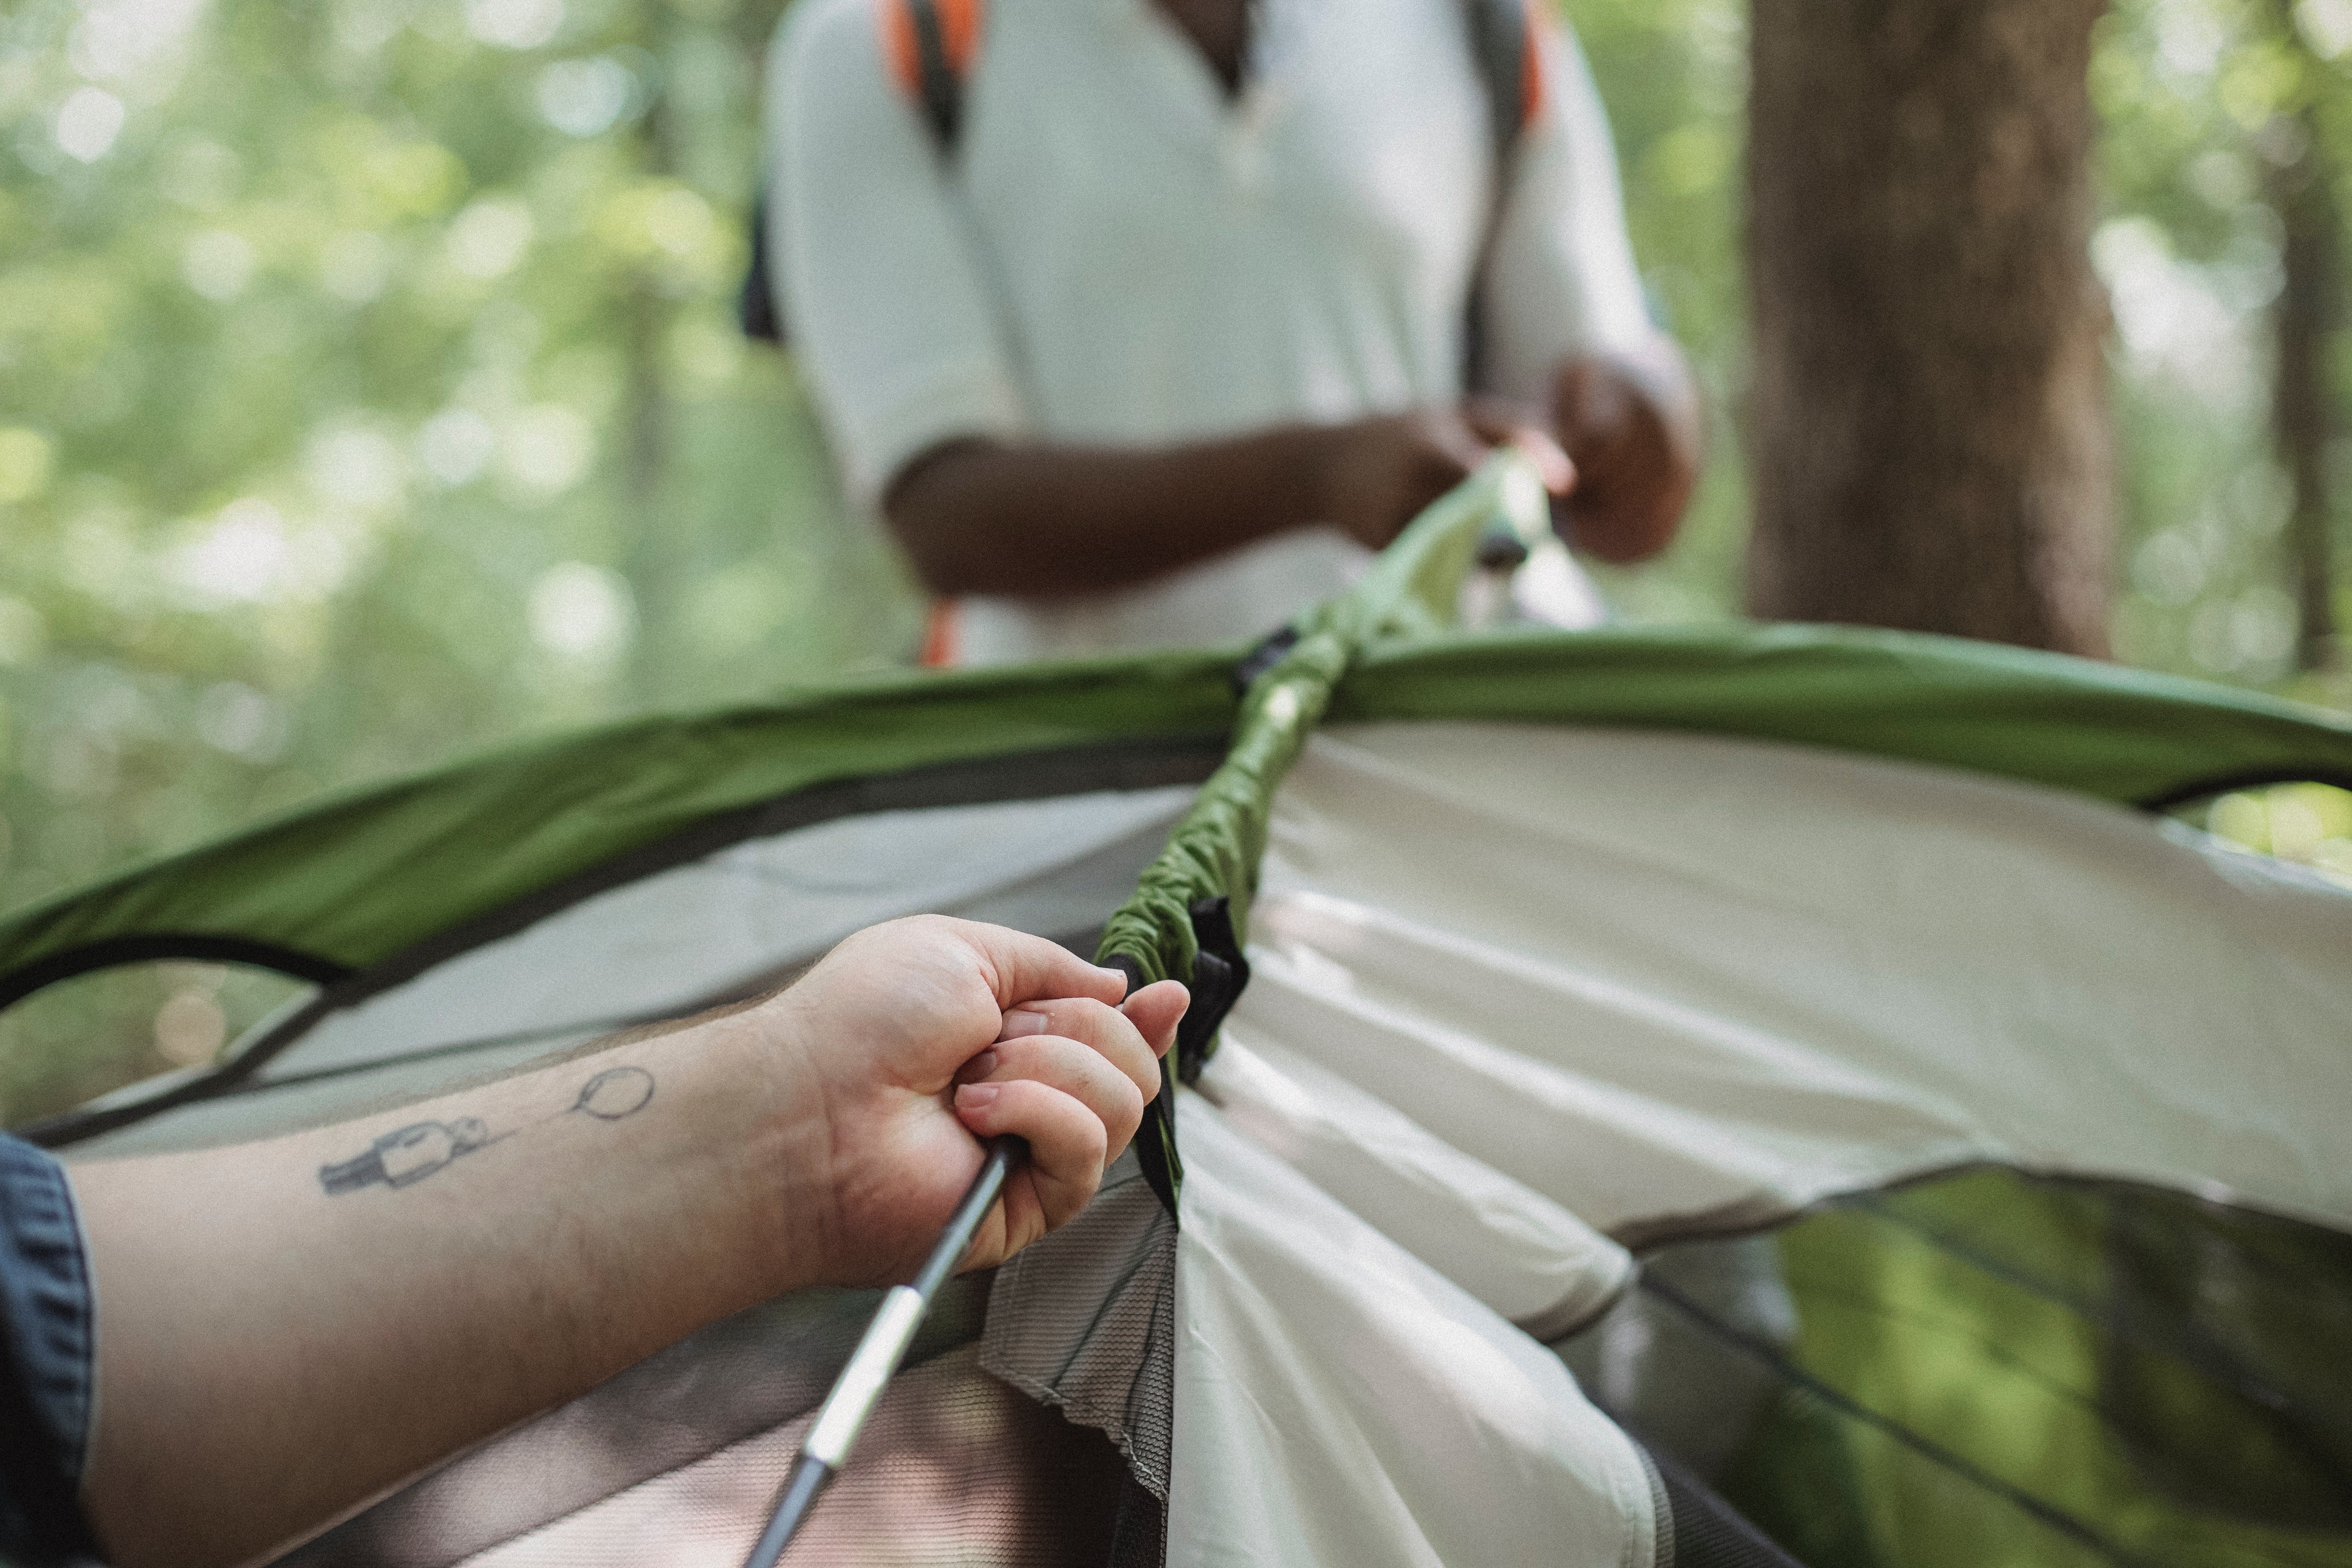 Jonathan and Michael were arguing over who would put the tent up. | Source: Pexels